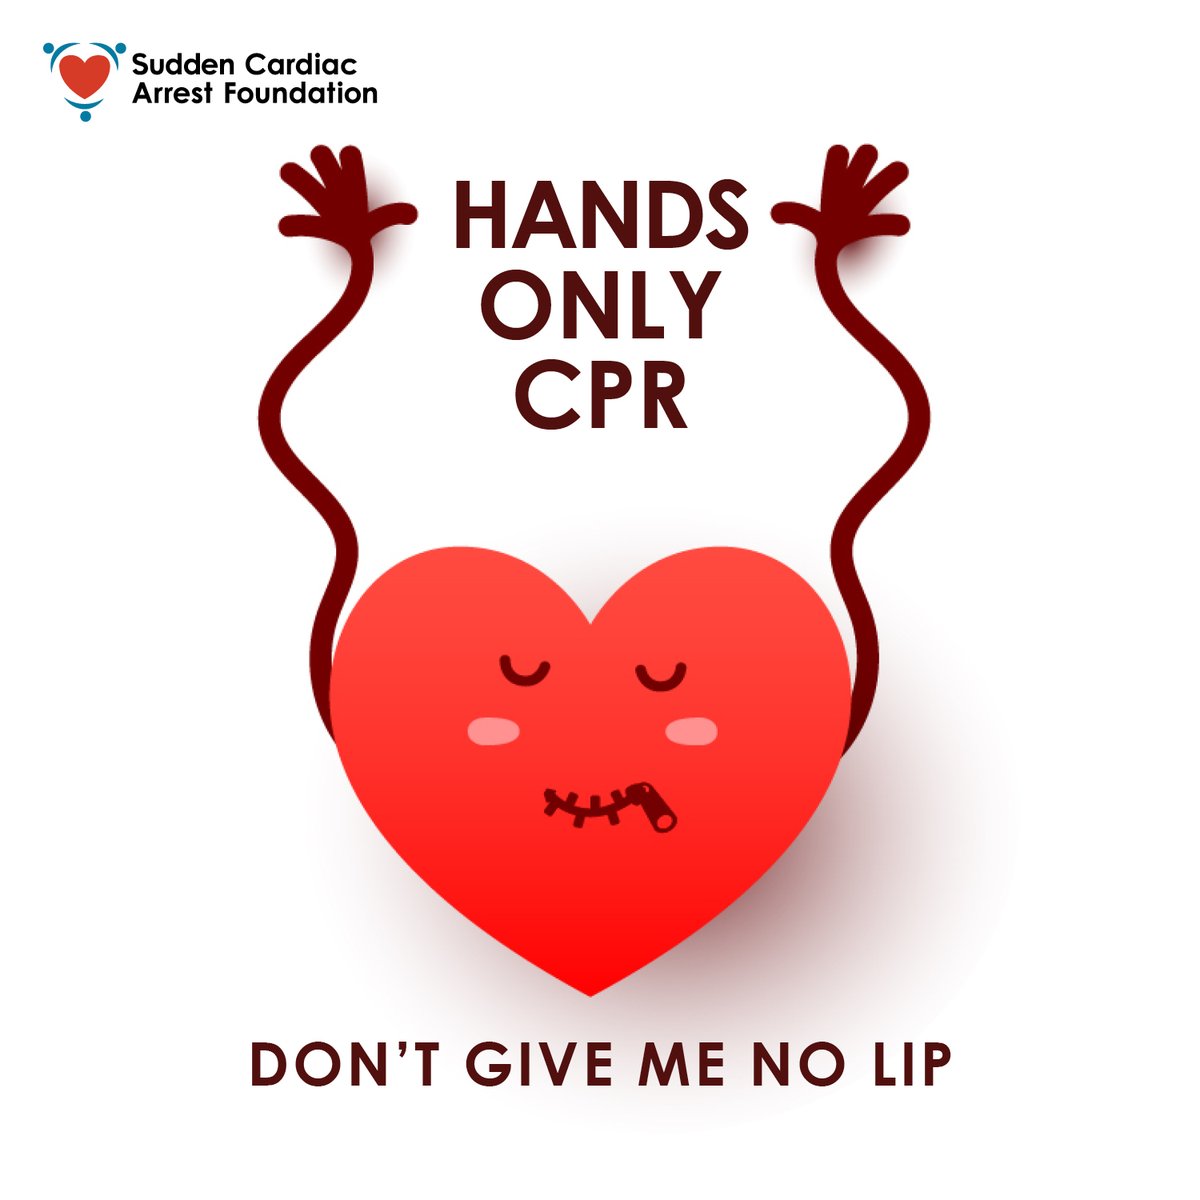 Don't be afraid to step in and save a life! Learn how to perform hands-only CPR and make a difference in your community. #handsonlycpr #savealife #cprawareness #OurHearts